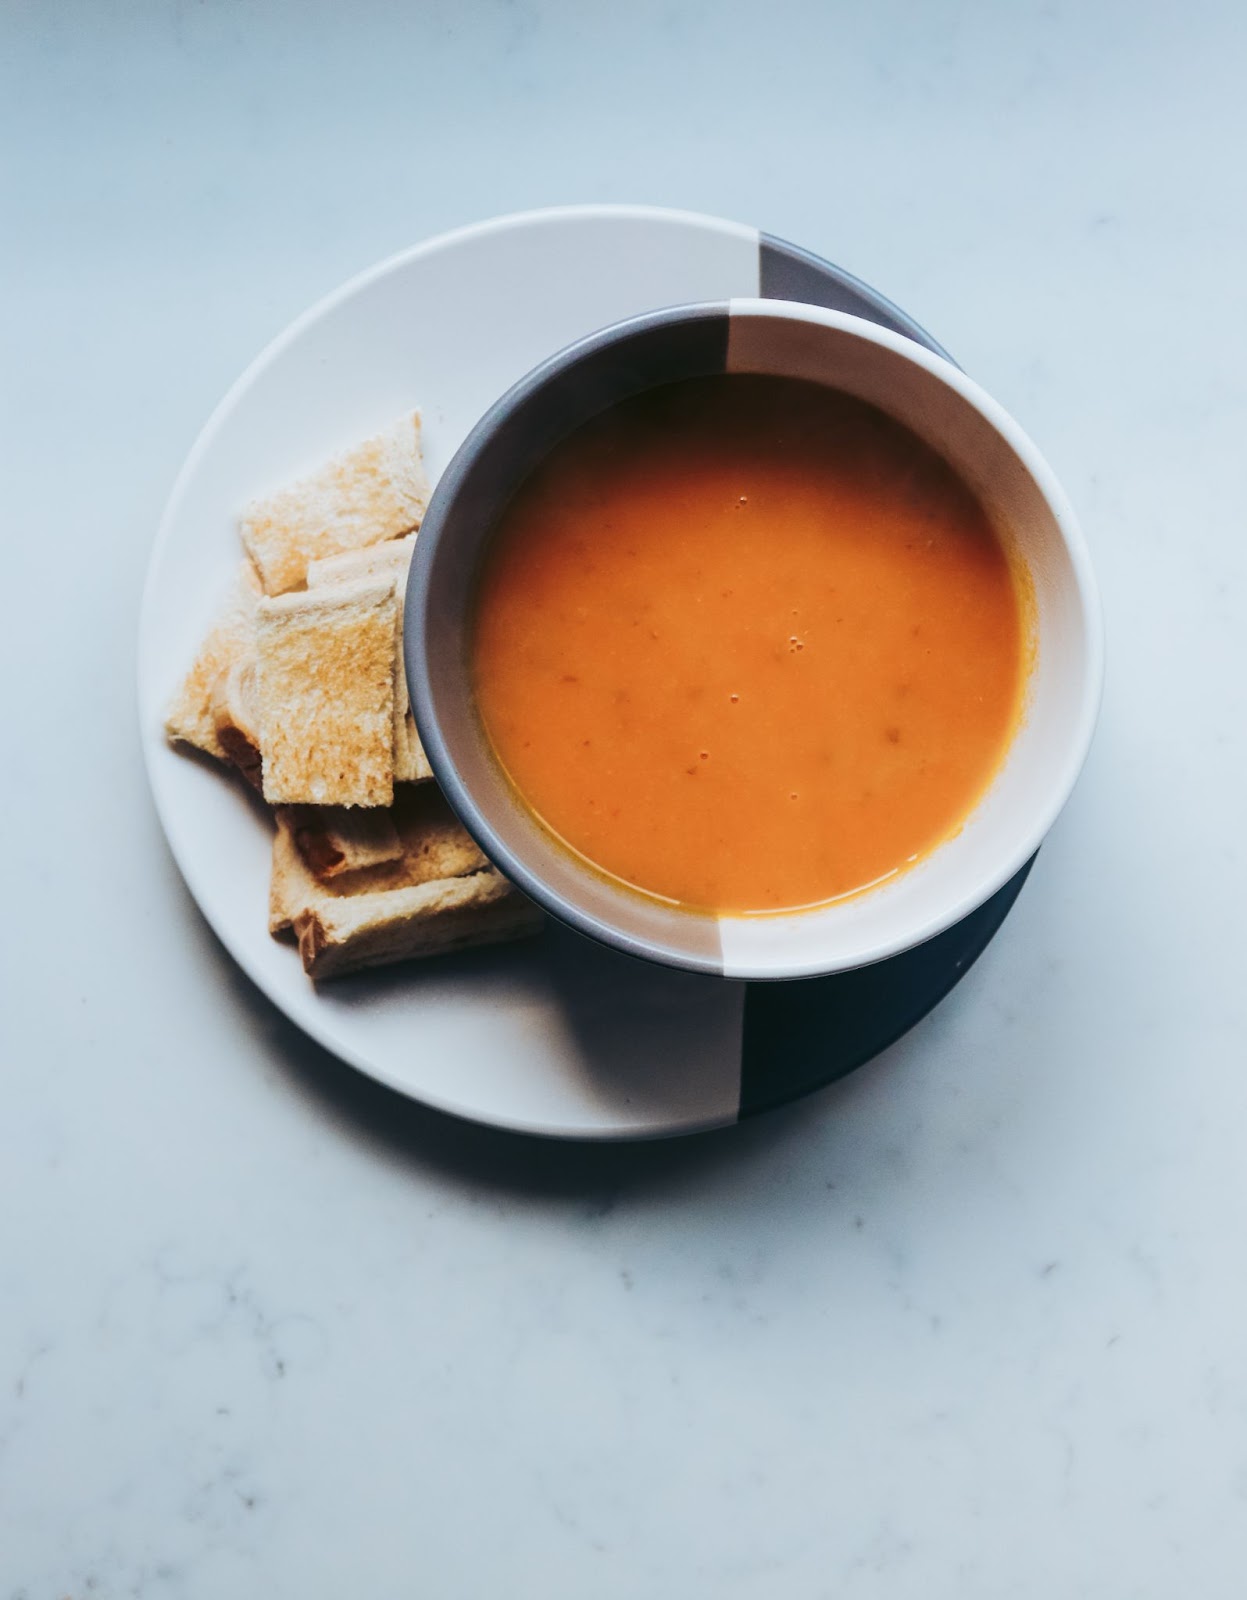 Soup and crackers on a plate